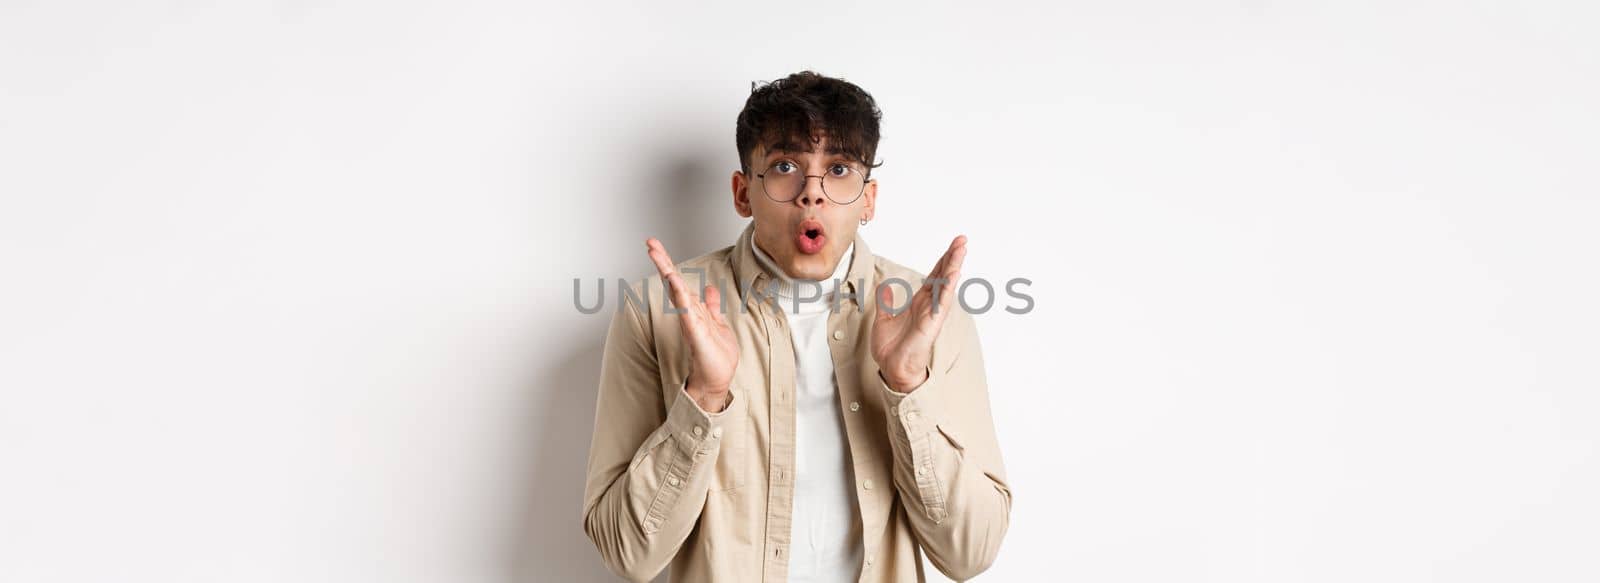 Portrait of surprised hipster guy in glasses checking out awesome promo, say wow and gasping amazed, raising hands up with disbelief, standing on white background.